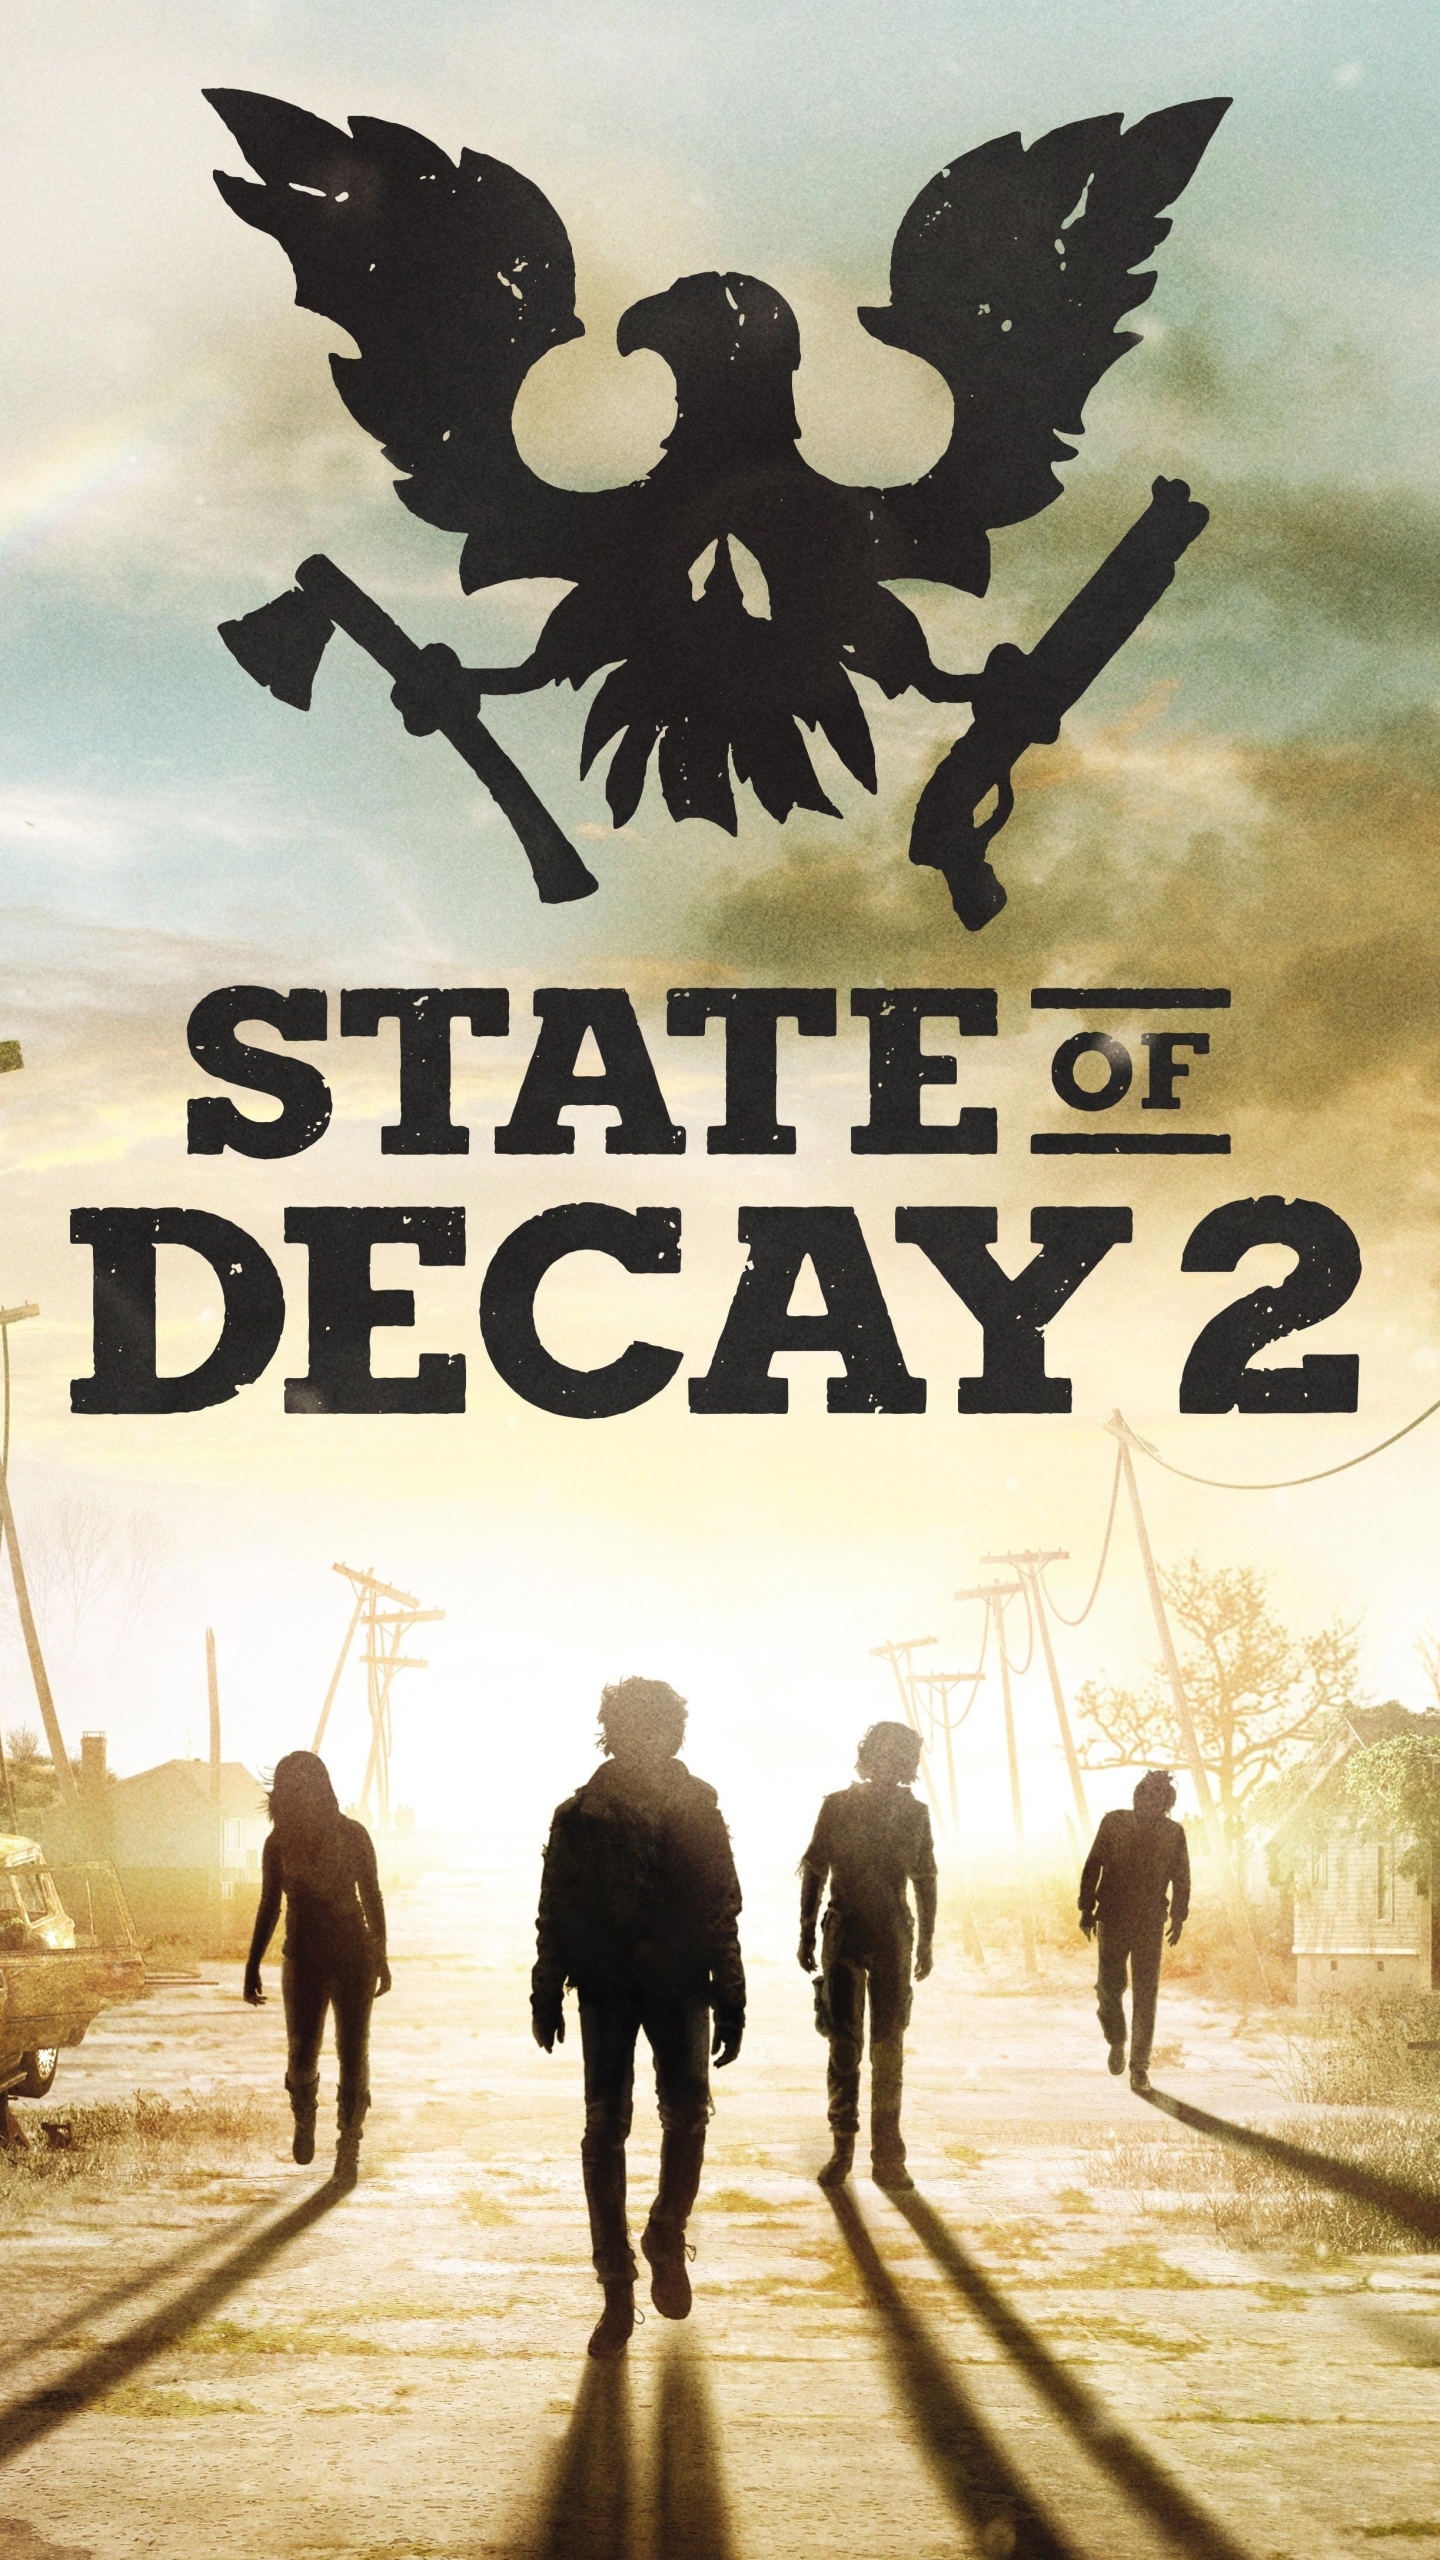 state of decay 2, video game, zombie